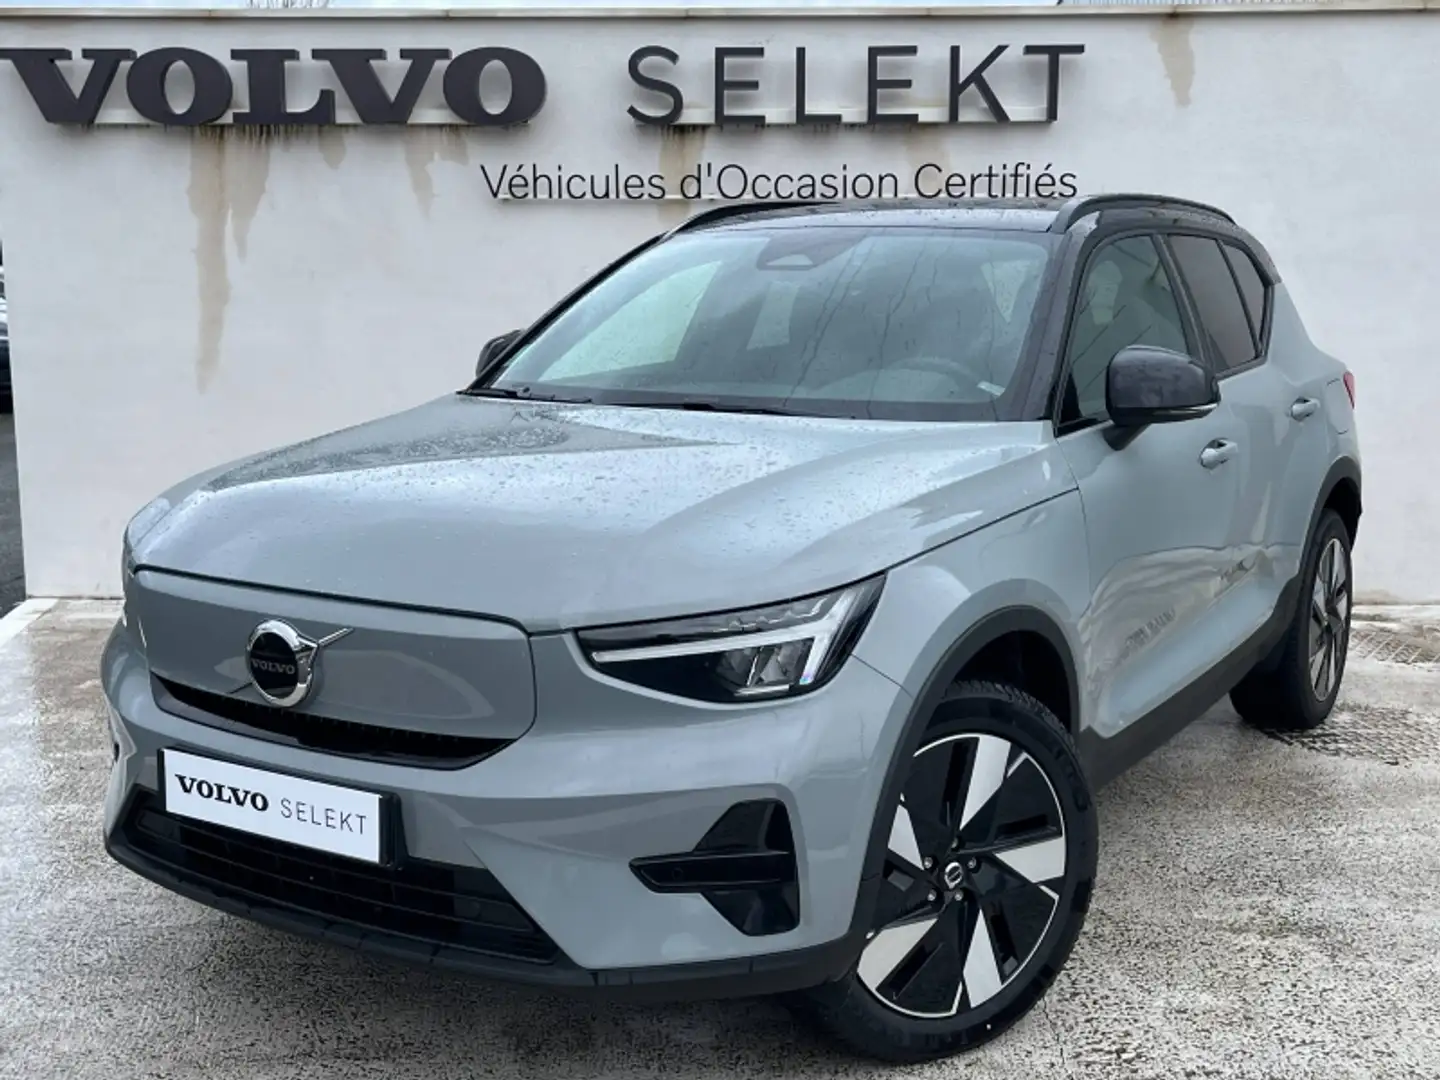 Volvo XC40 Recharge Extended Range 252ch Plus - 1